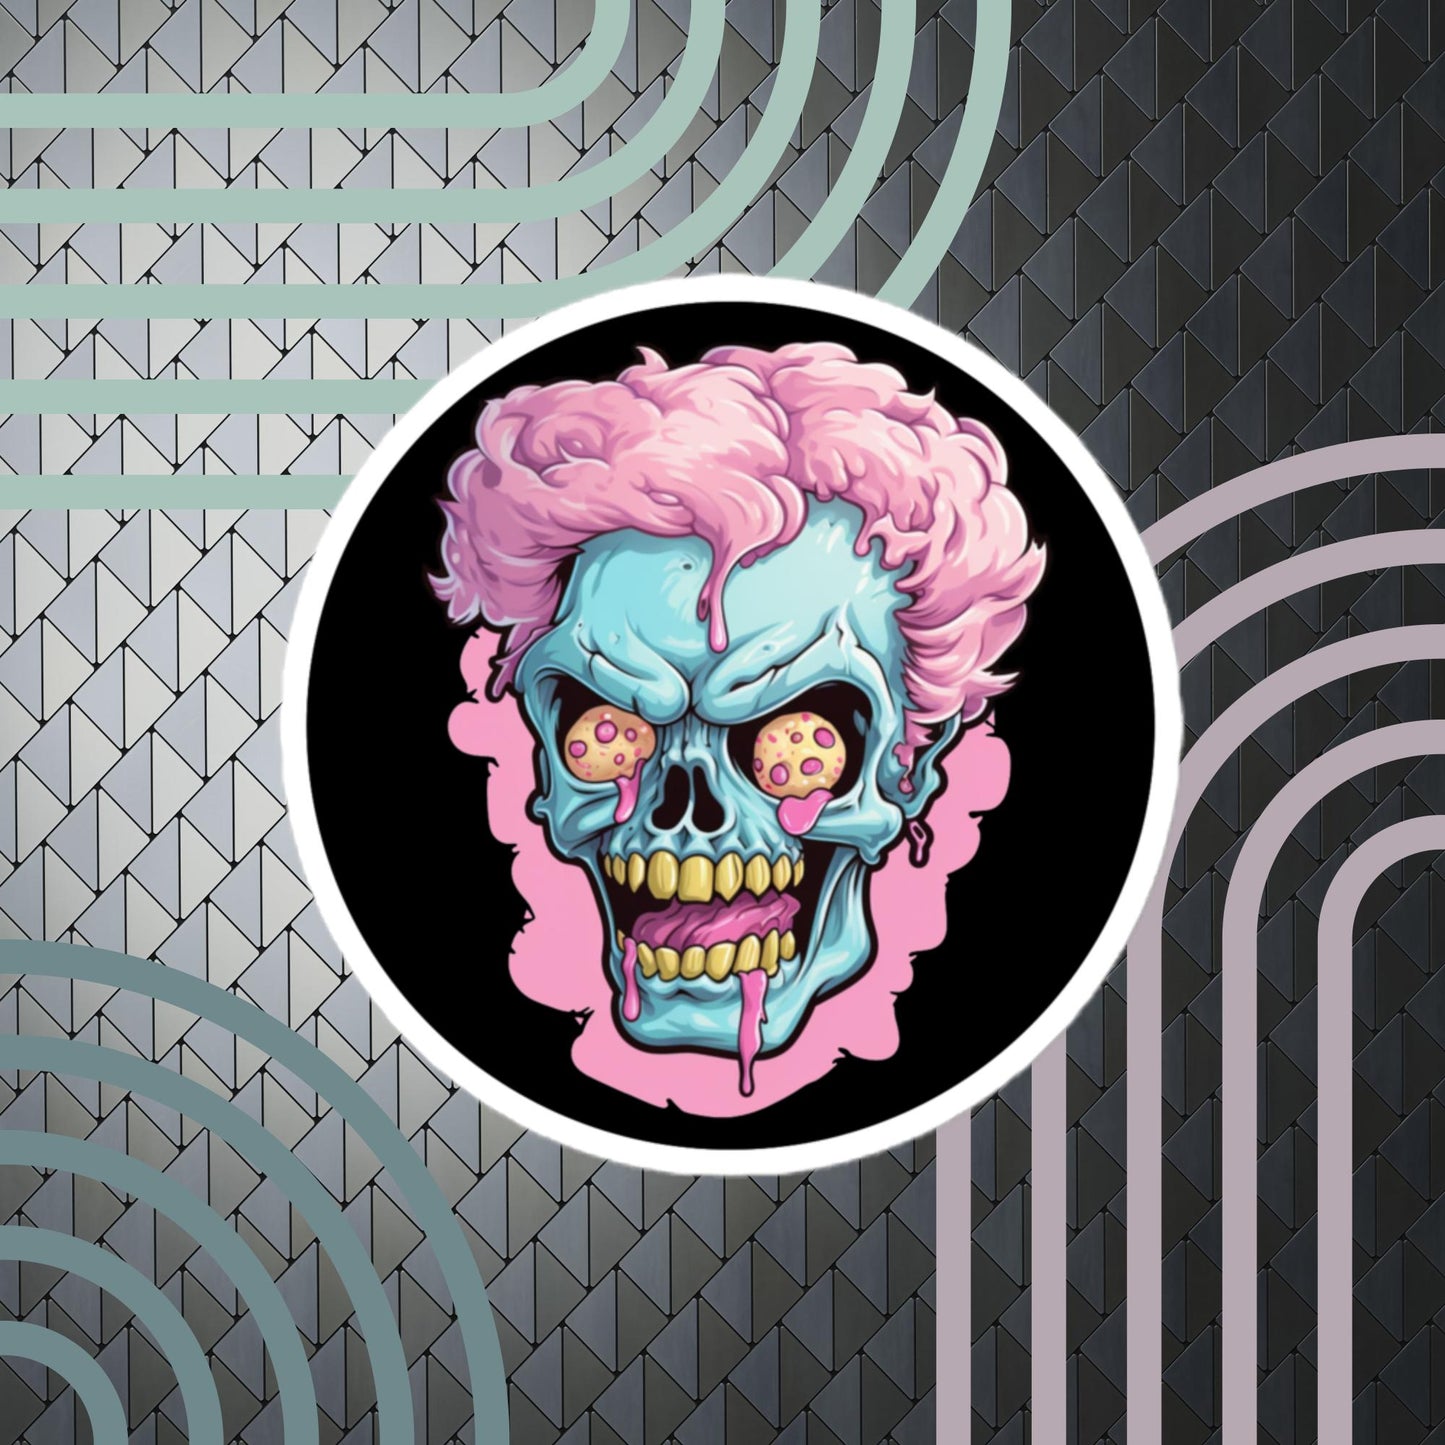 Amazing Cotton Candy Inspired Zombie Sticker!